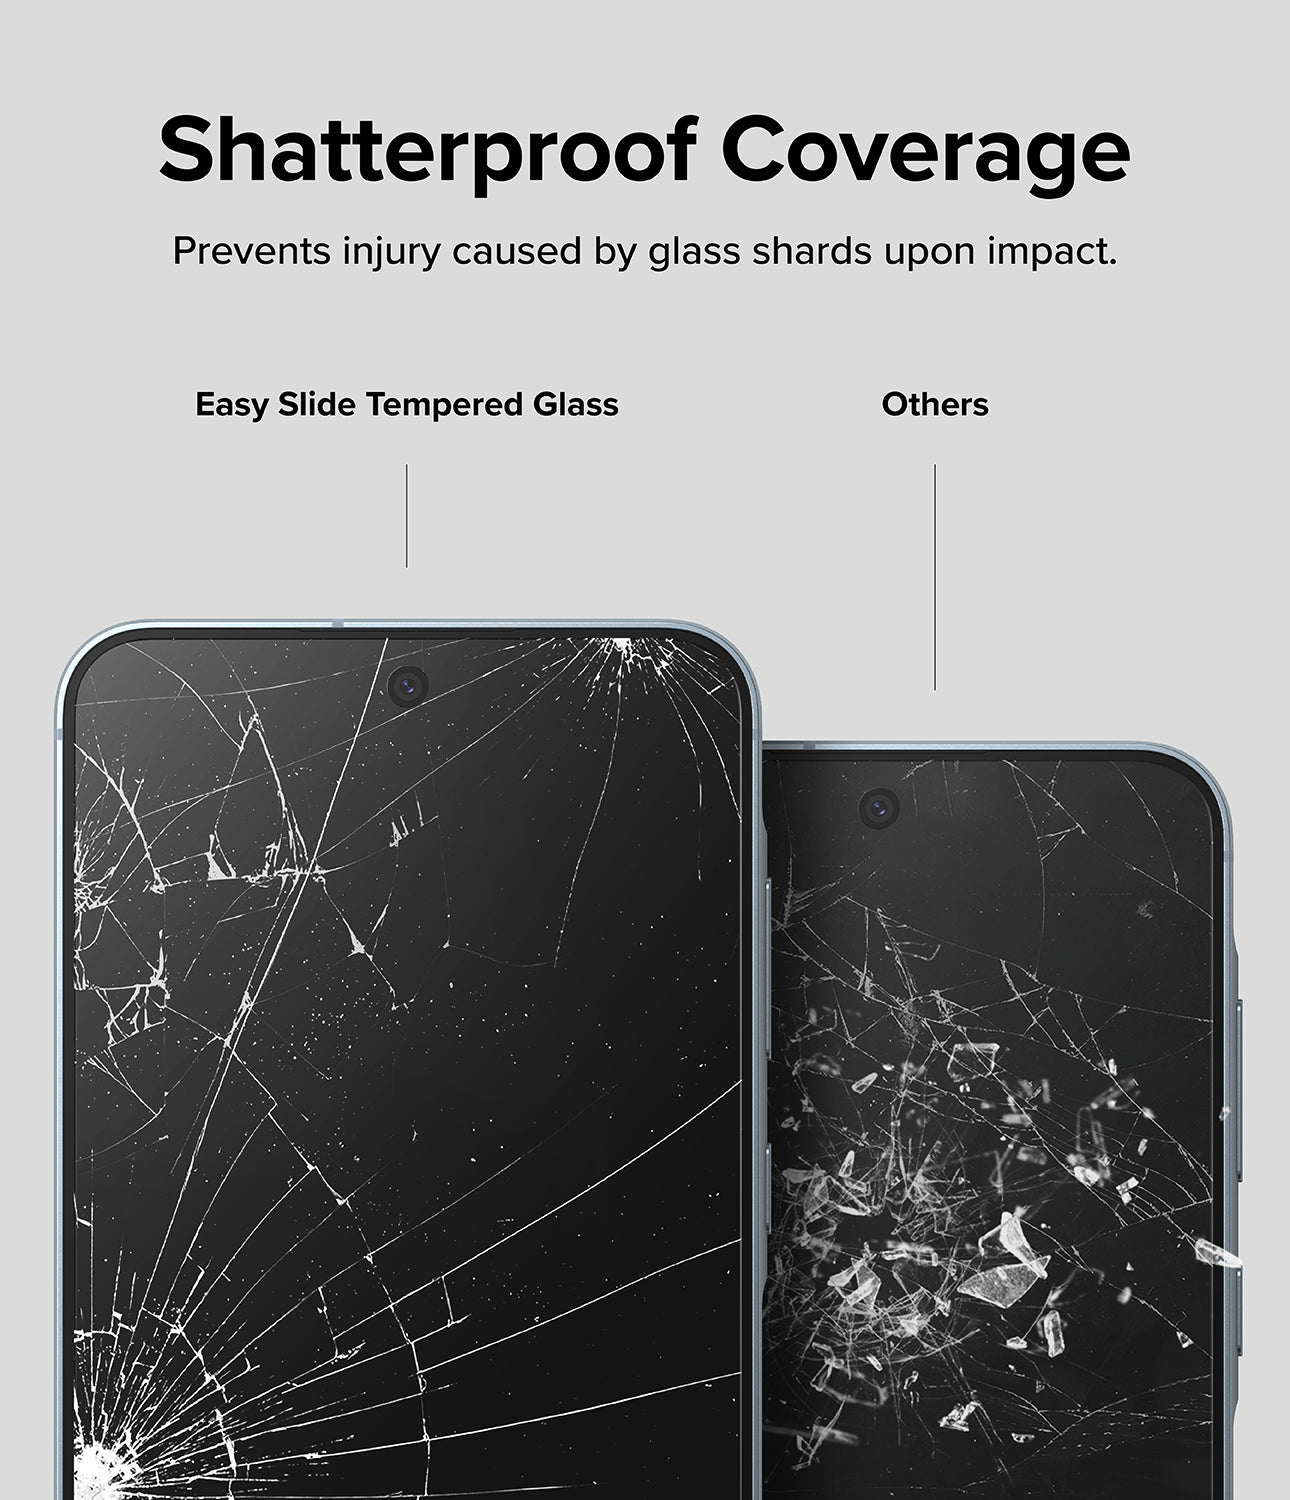 Galaxy A35 Screen Protector | Easy Slide Tempered Glass - Shatterproof Coverage. Prevents injury caused by glass shards upon impact.